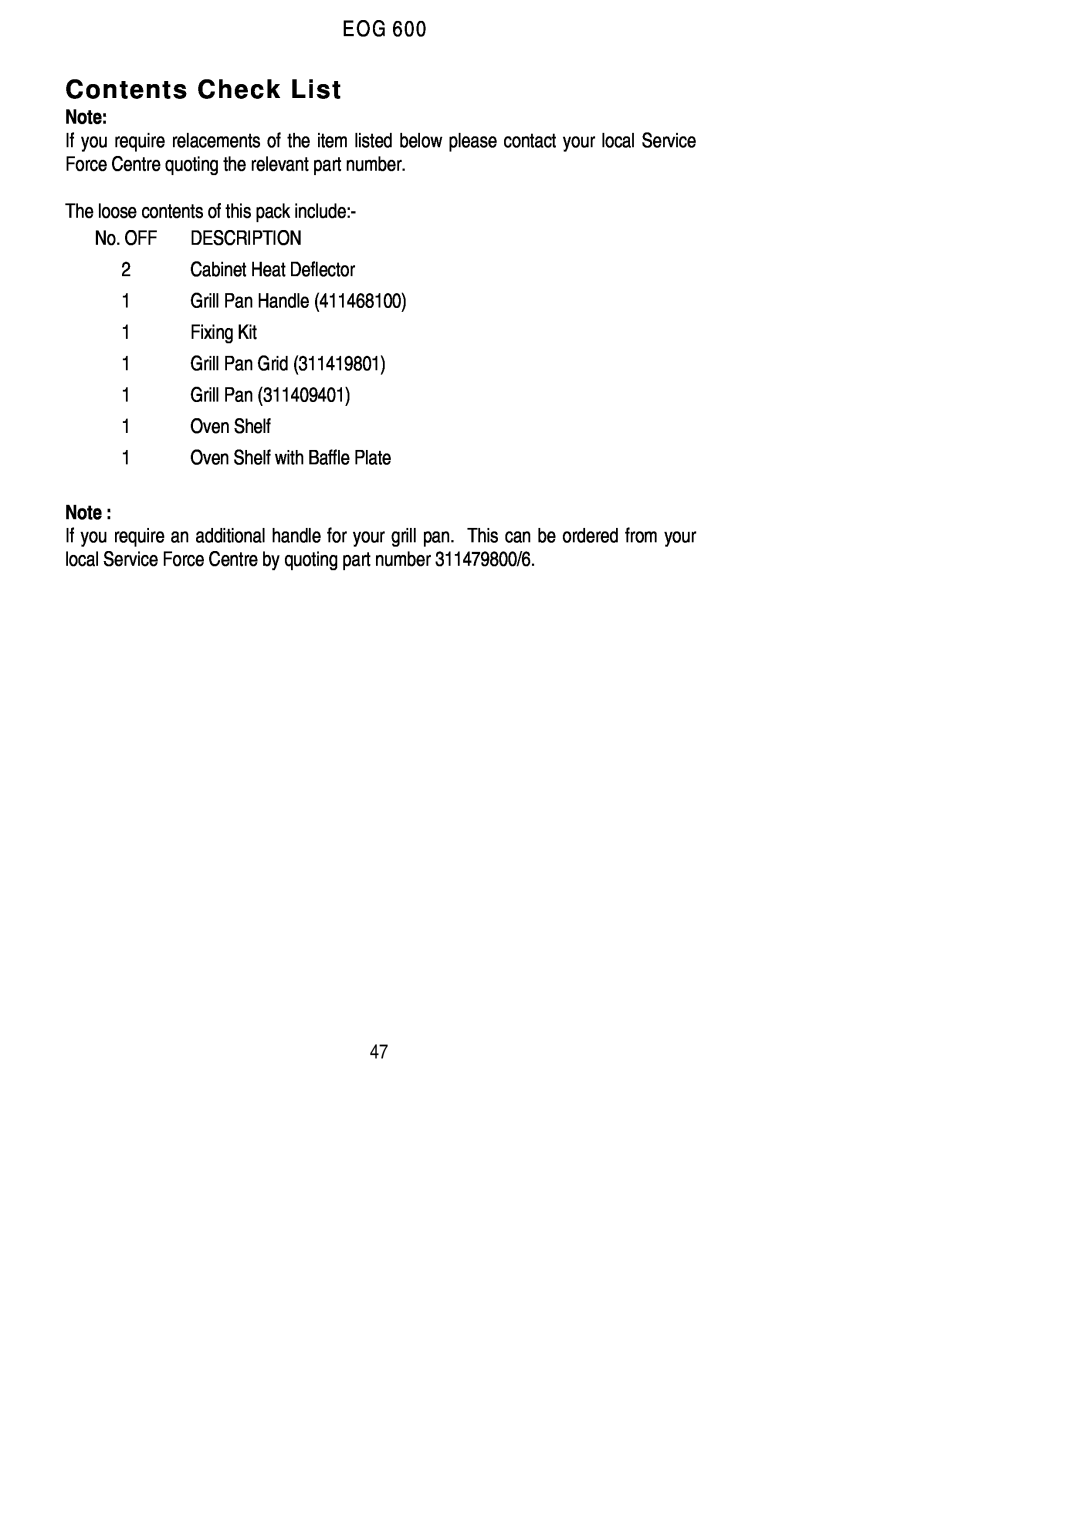 Electrolux EOG 600 manual Contents Check List 